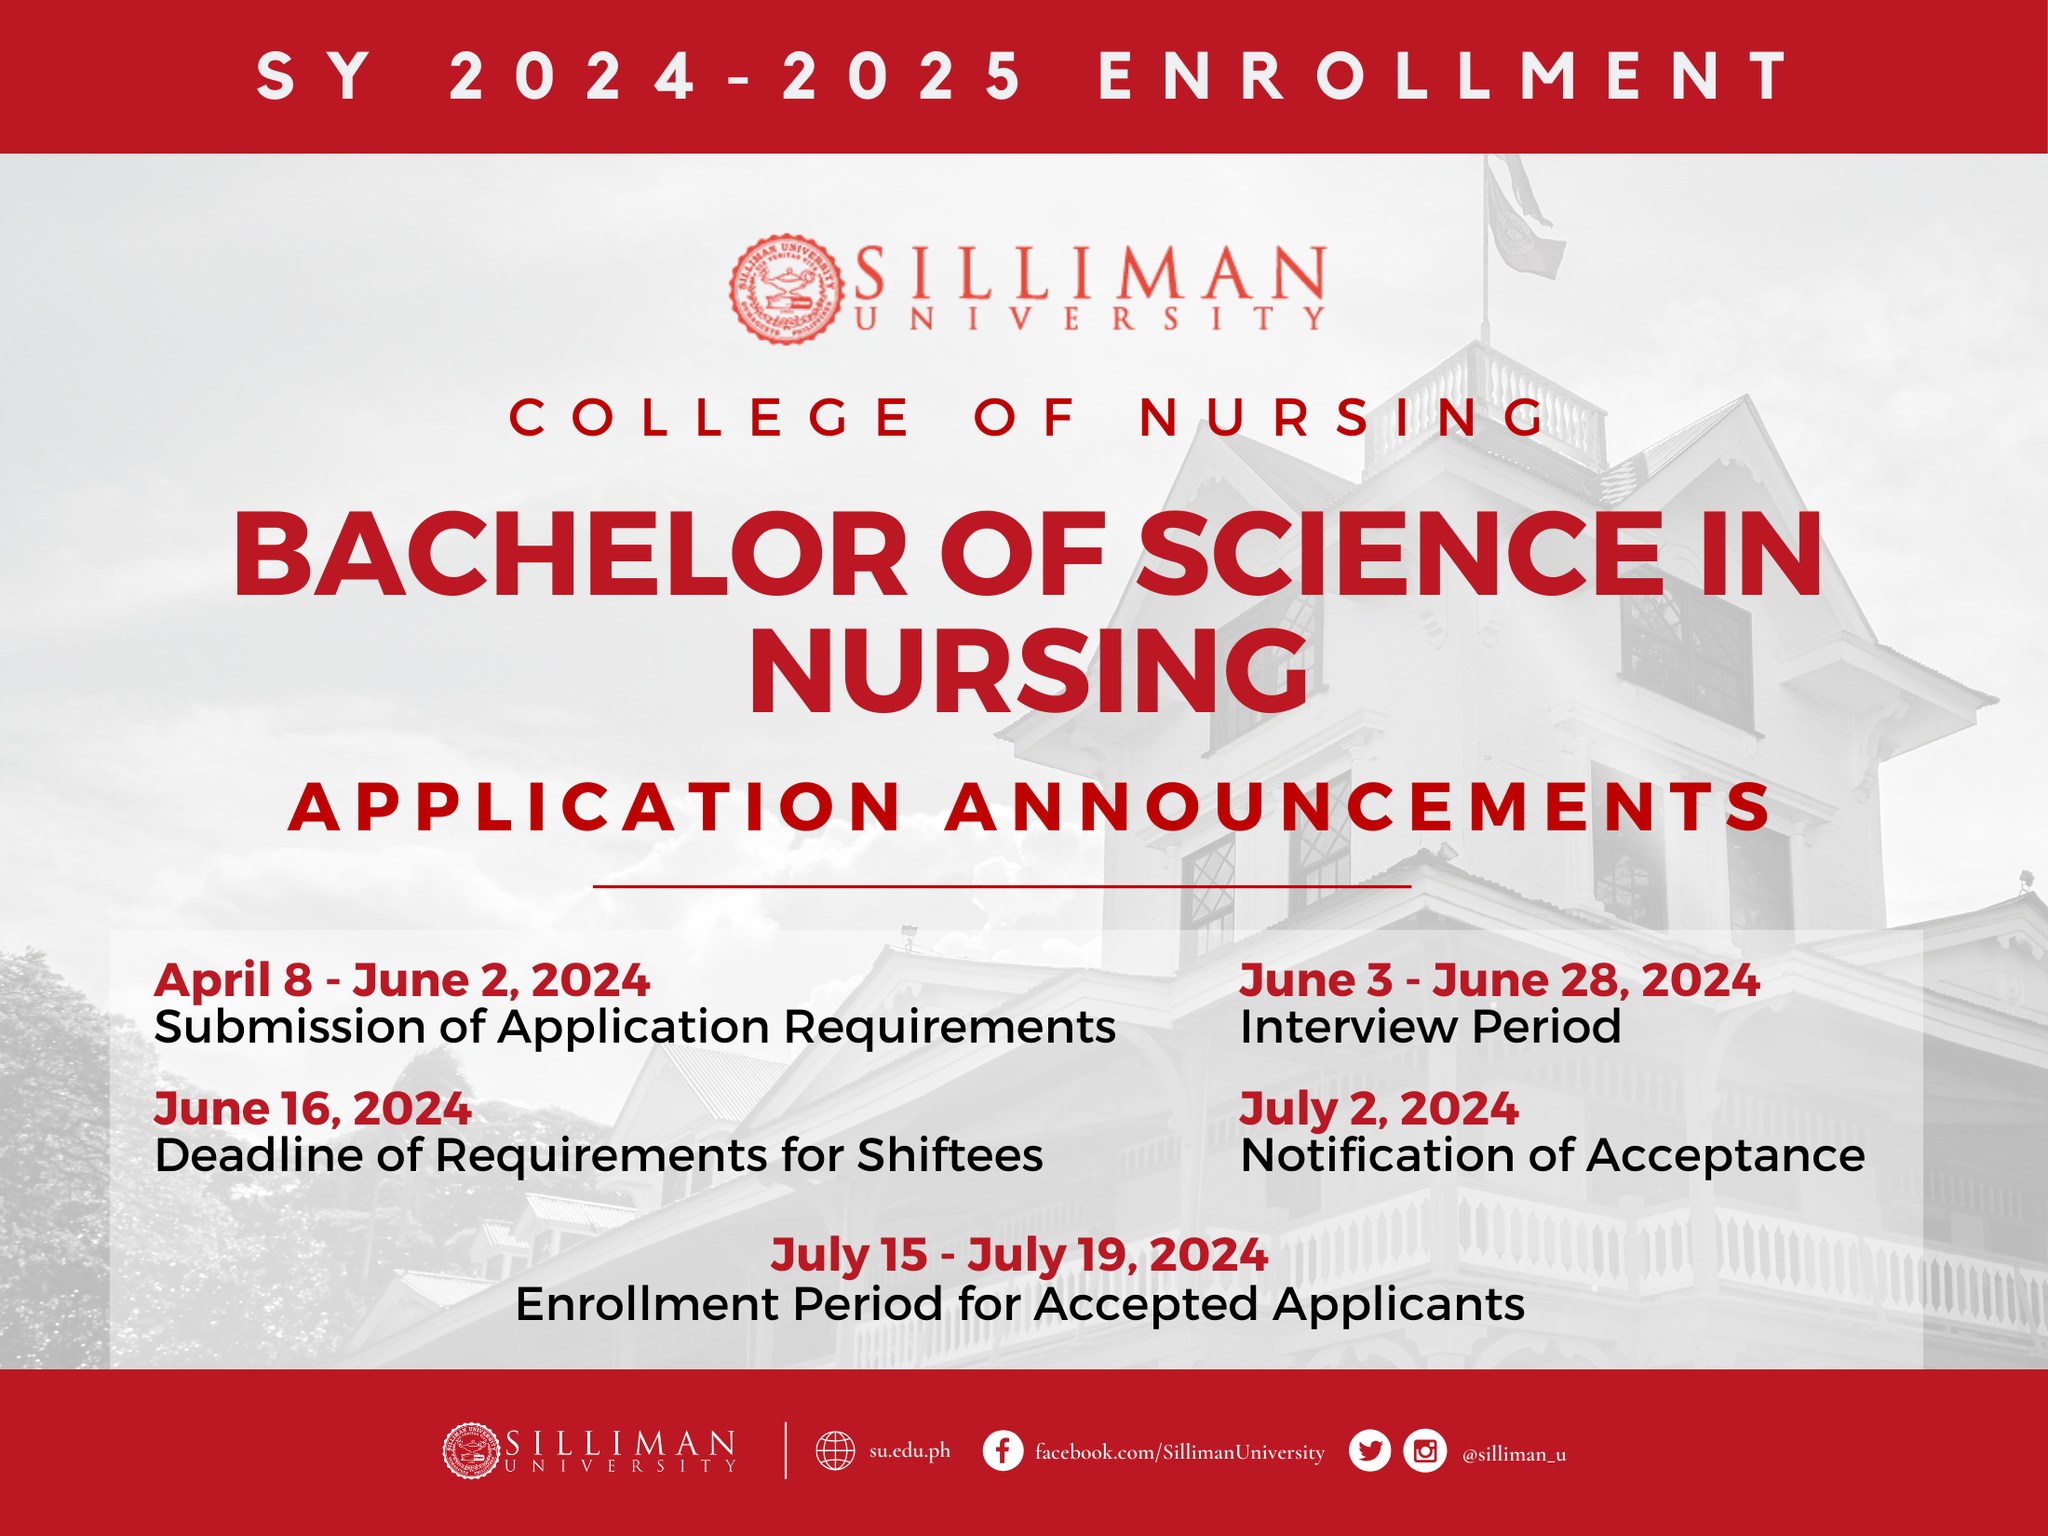 The Silliman University College of Nursing (SUCN) is opening its application process for the SY 2024-2025 beginning next week!